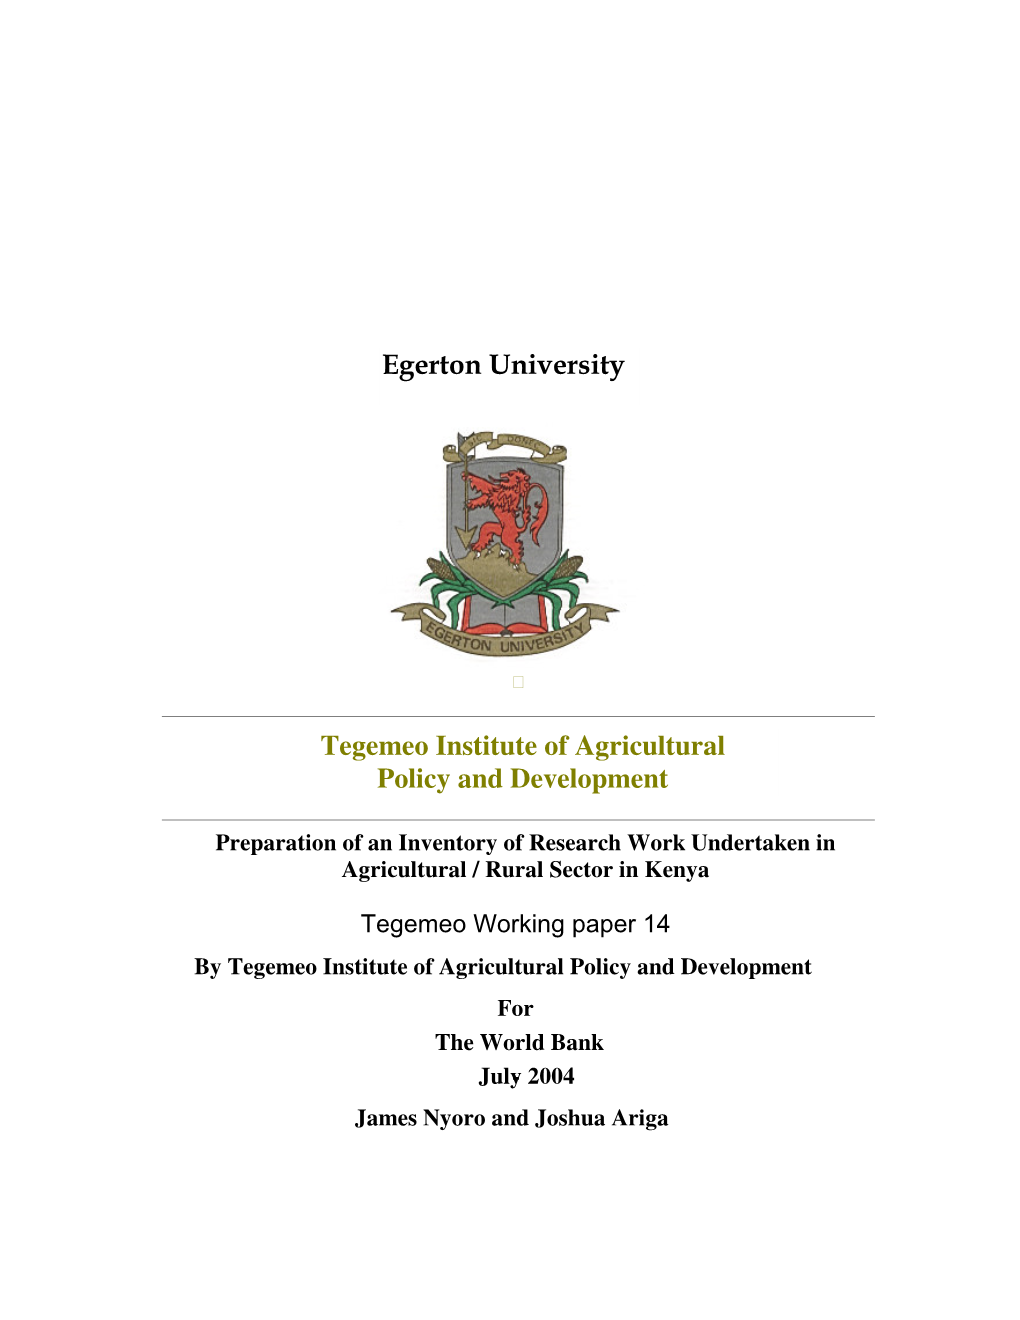 Egerton University Tegemeo Institute of Agricultural Policy And